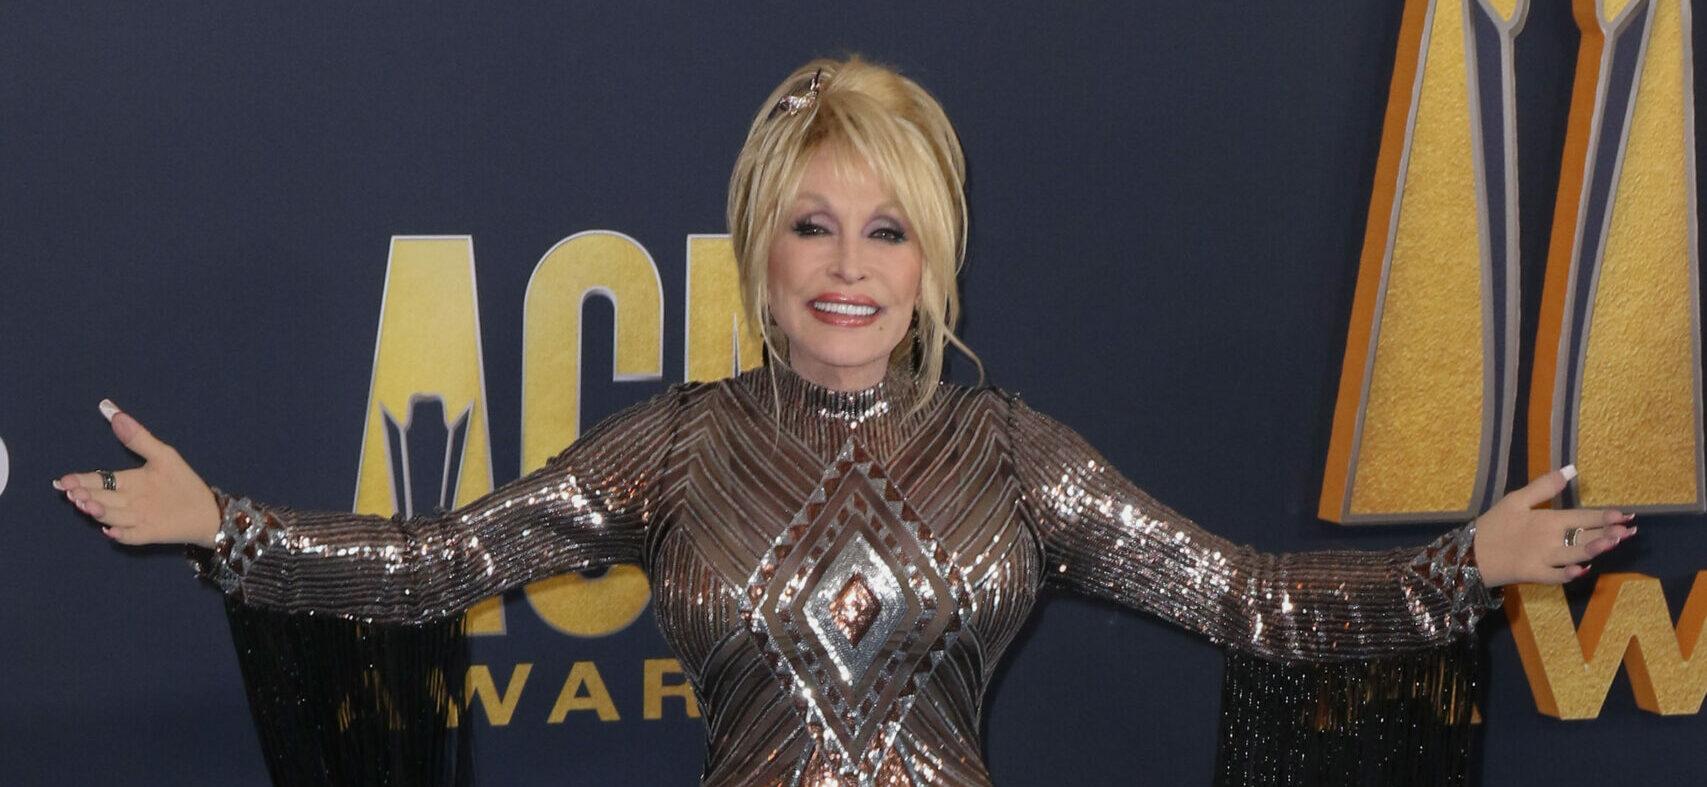 Dolly Parton at the 57th ACM Awards in Las Vegas